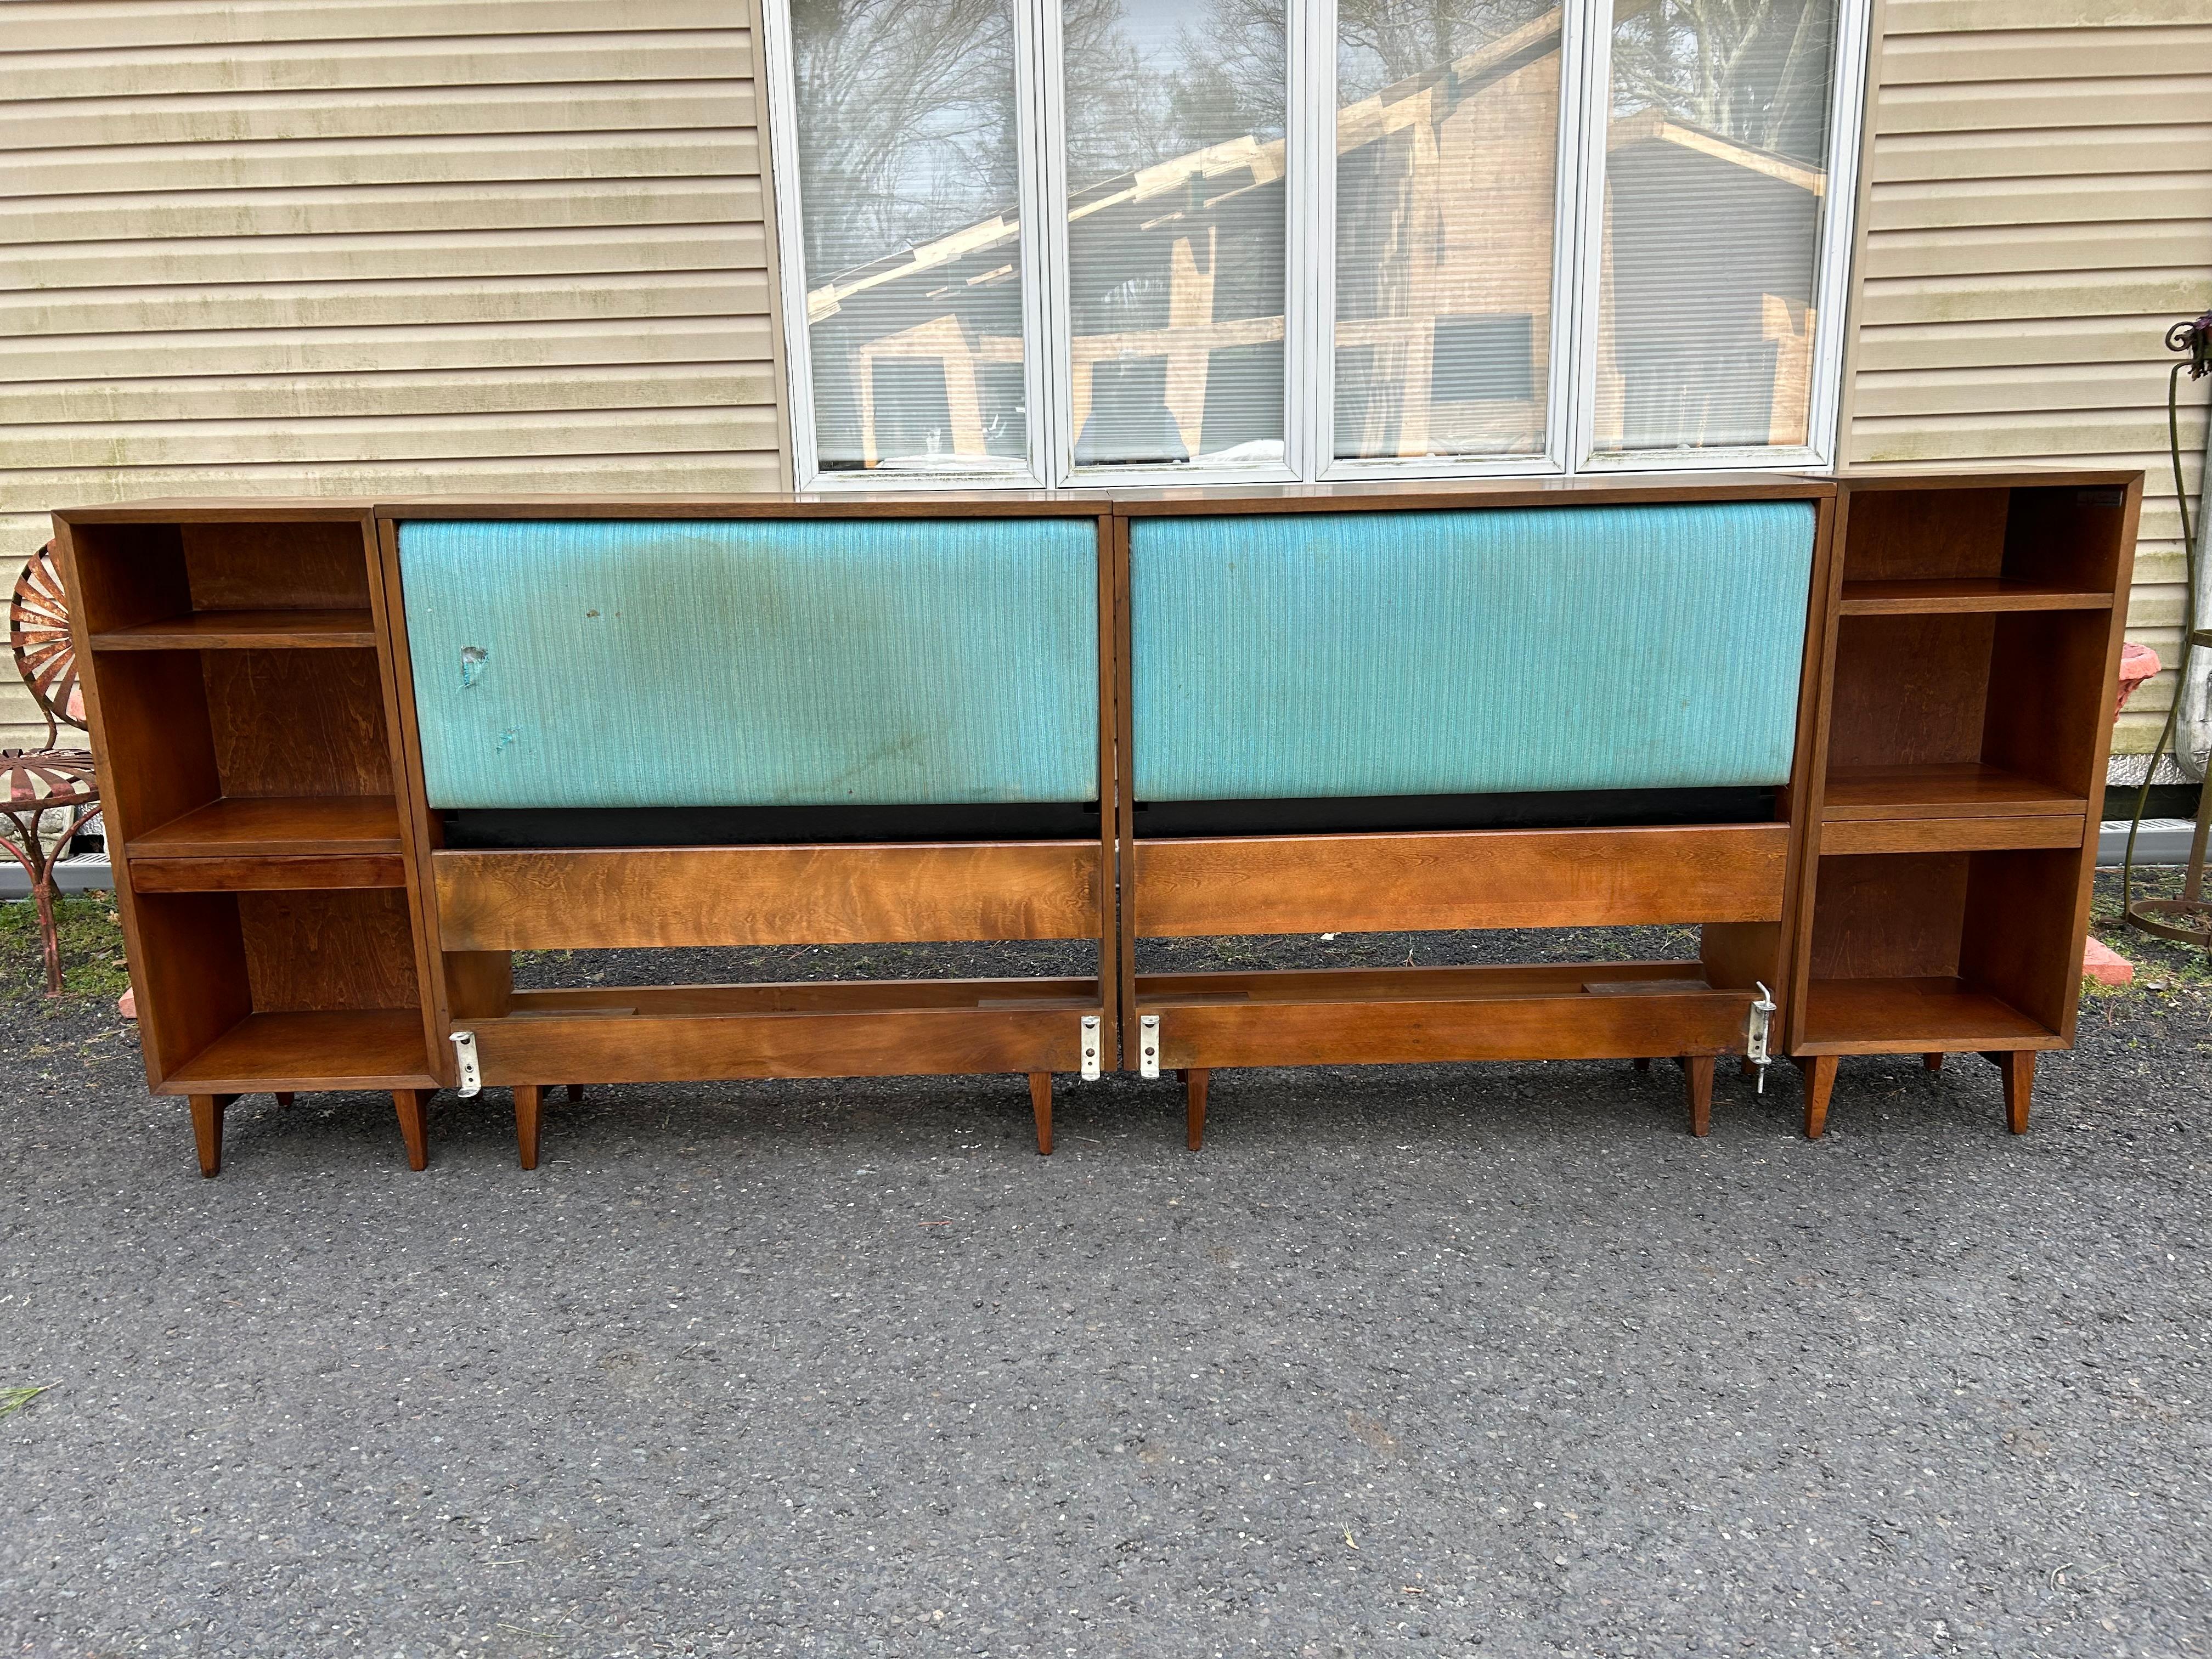 Rare classic George Nelson 4 piece headboard with matching night stands.
An adjustable, padded panel allows for open or closed storage on the twin headboards which make a king-size when used together.  The top opens on each to provide storage of